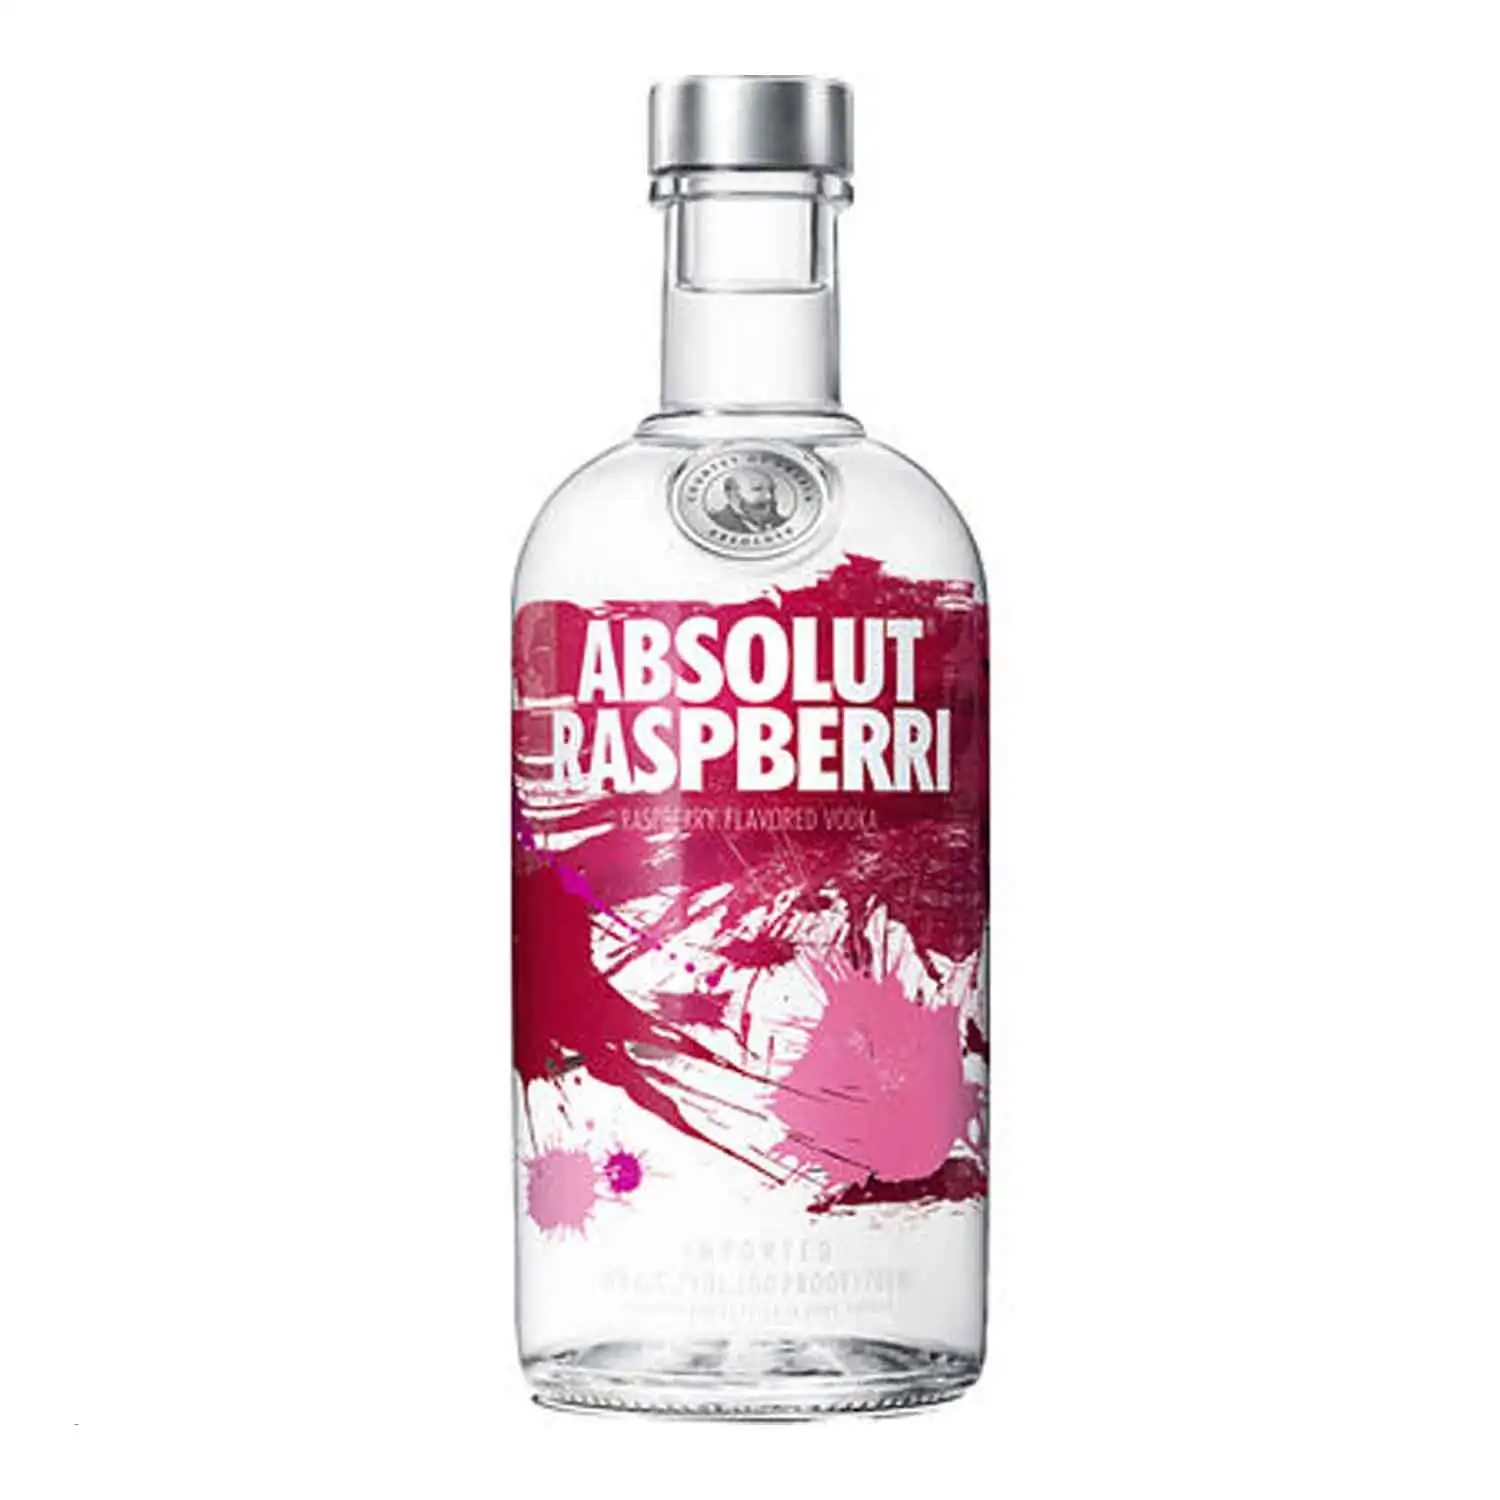 Absolut framboise 70cl Alc 40% - Buy at Real Tobacco